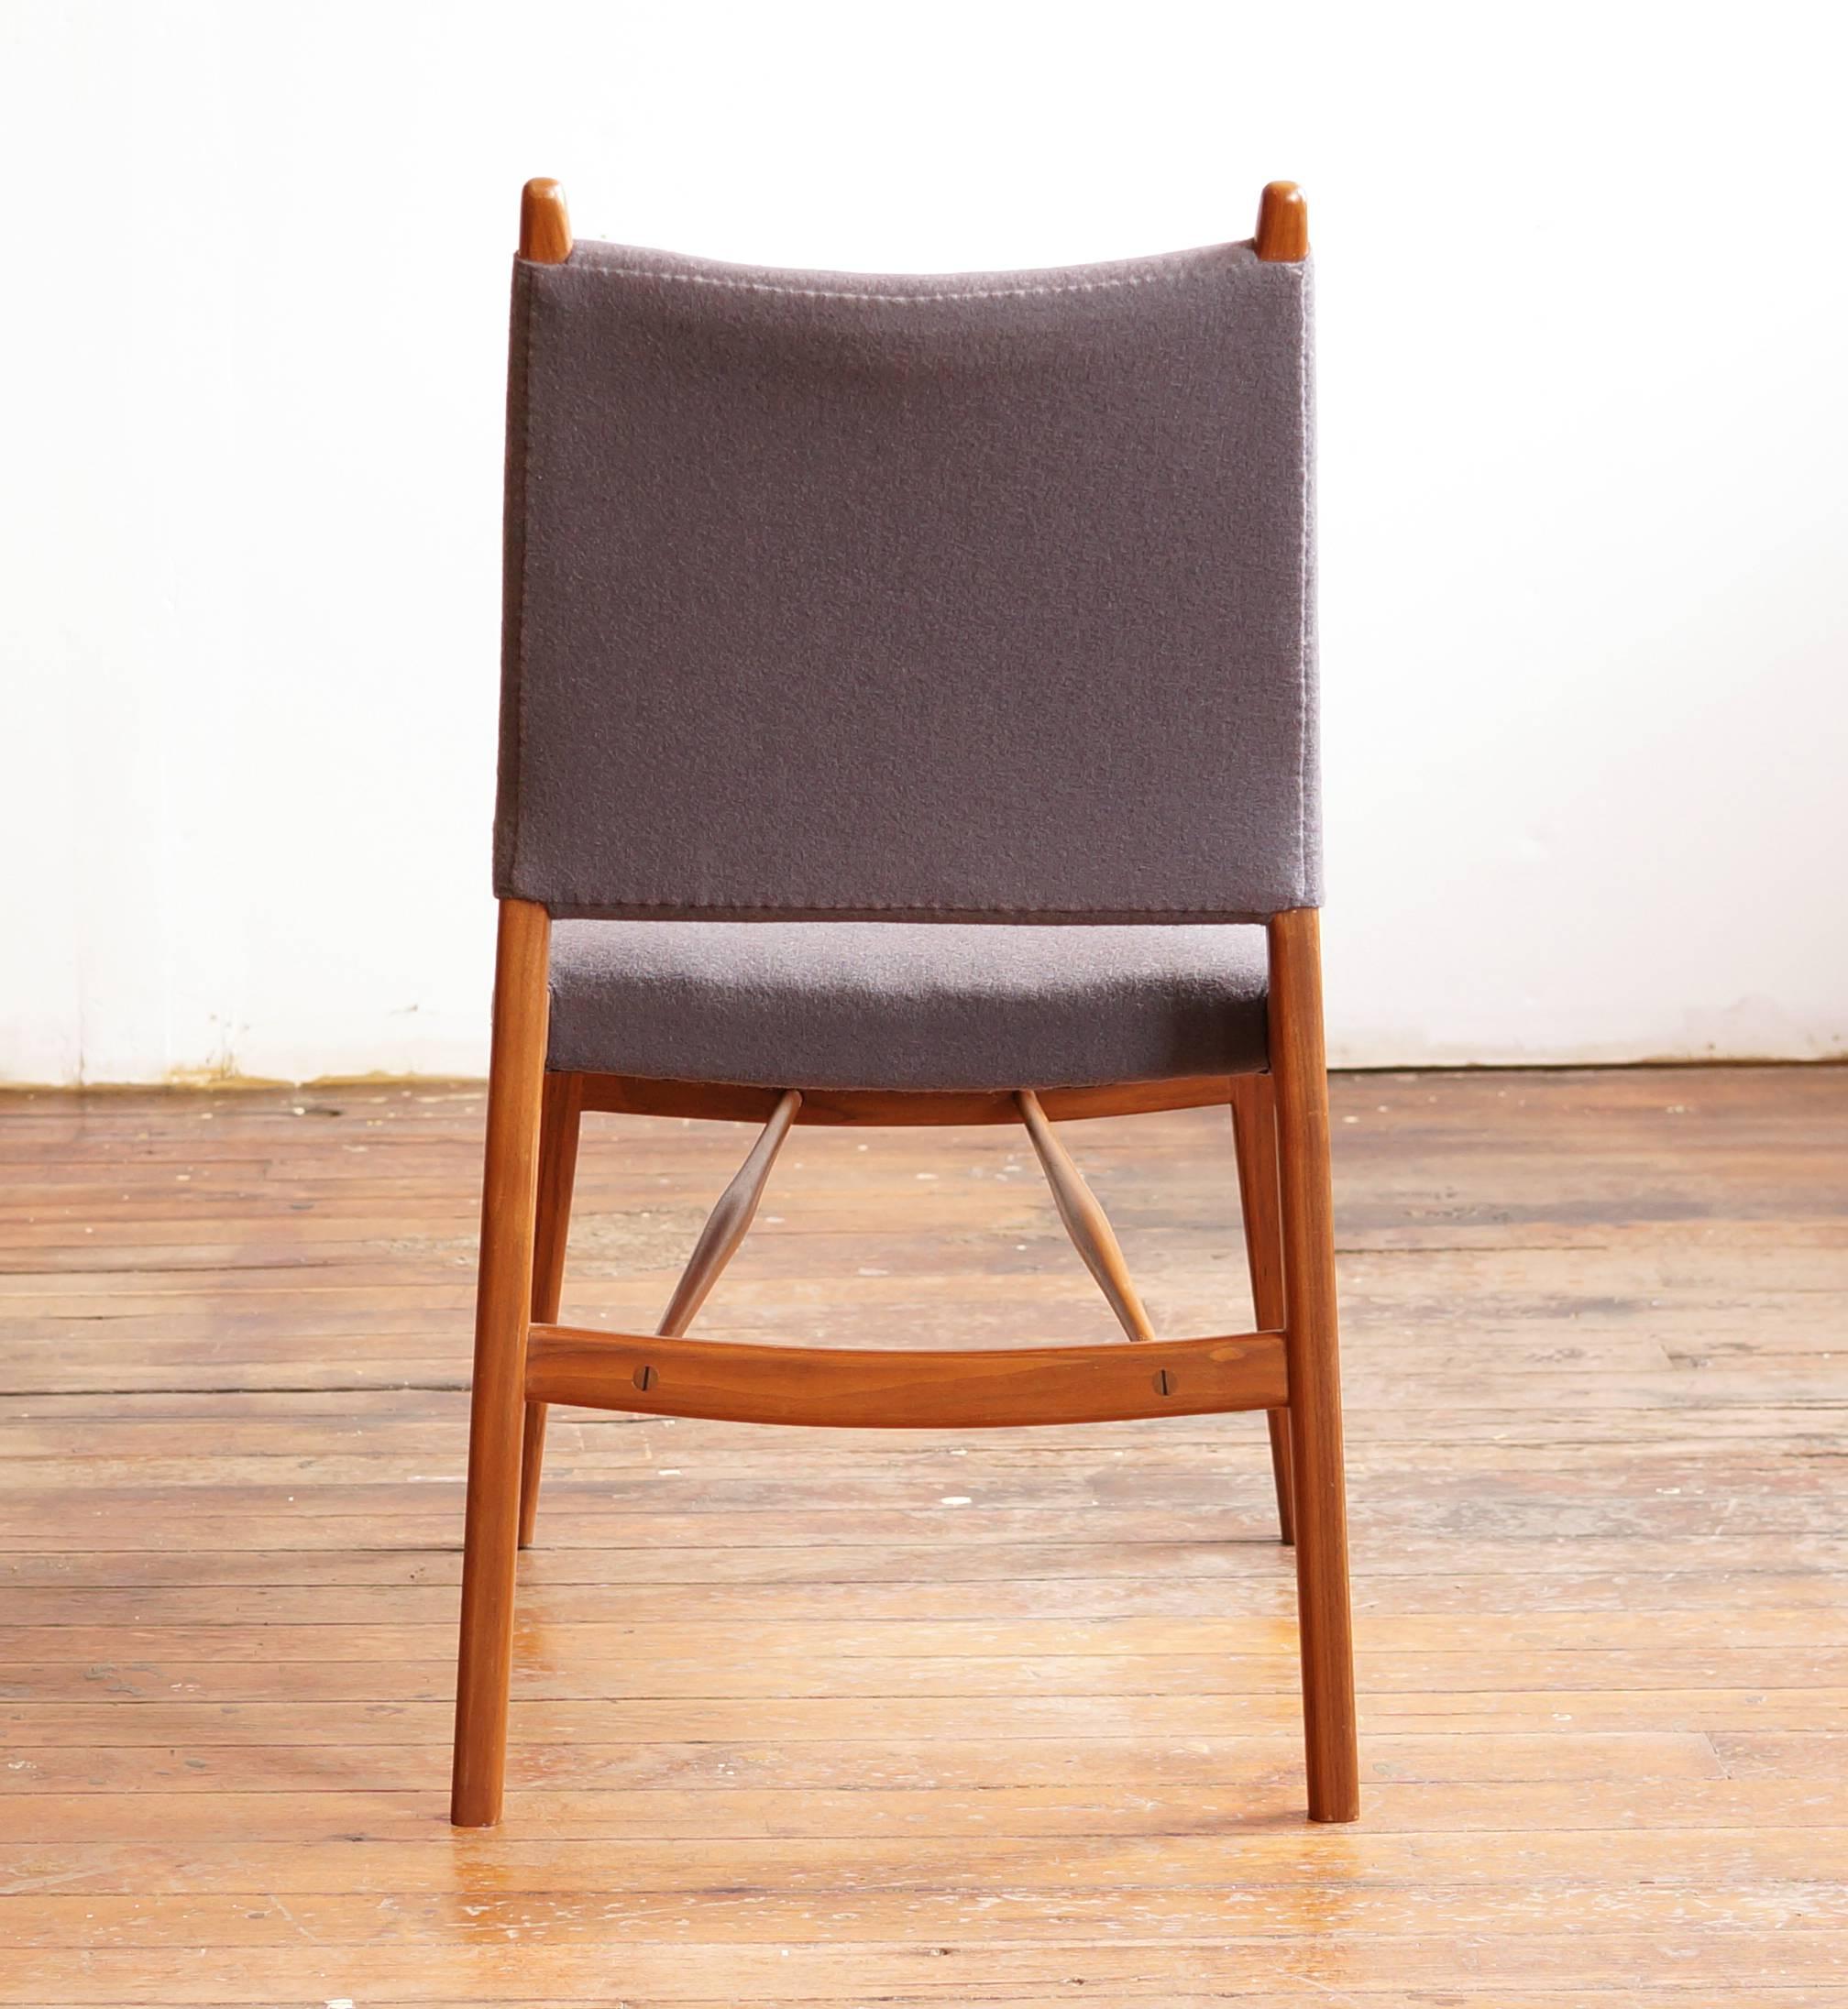 The C05 dining chair in solid walnut, with upholstered seat and back. Two lower spindles add strength and a decorative element with exposed wedged joinery. This chair nods to midcentury classics in the subtle interplay between wood and upholstery.